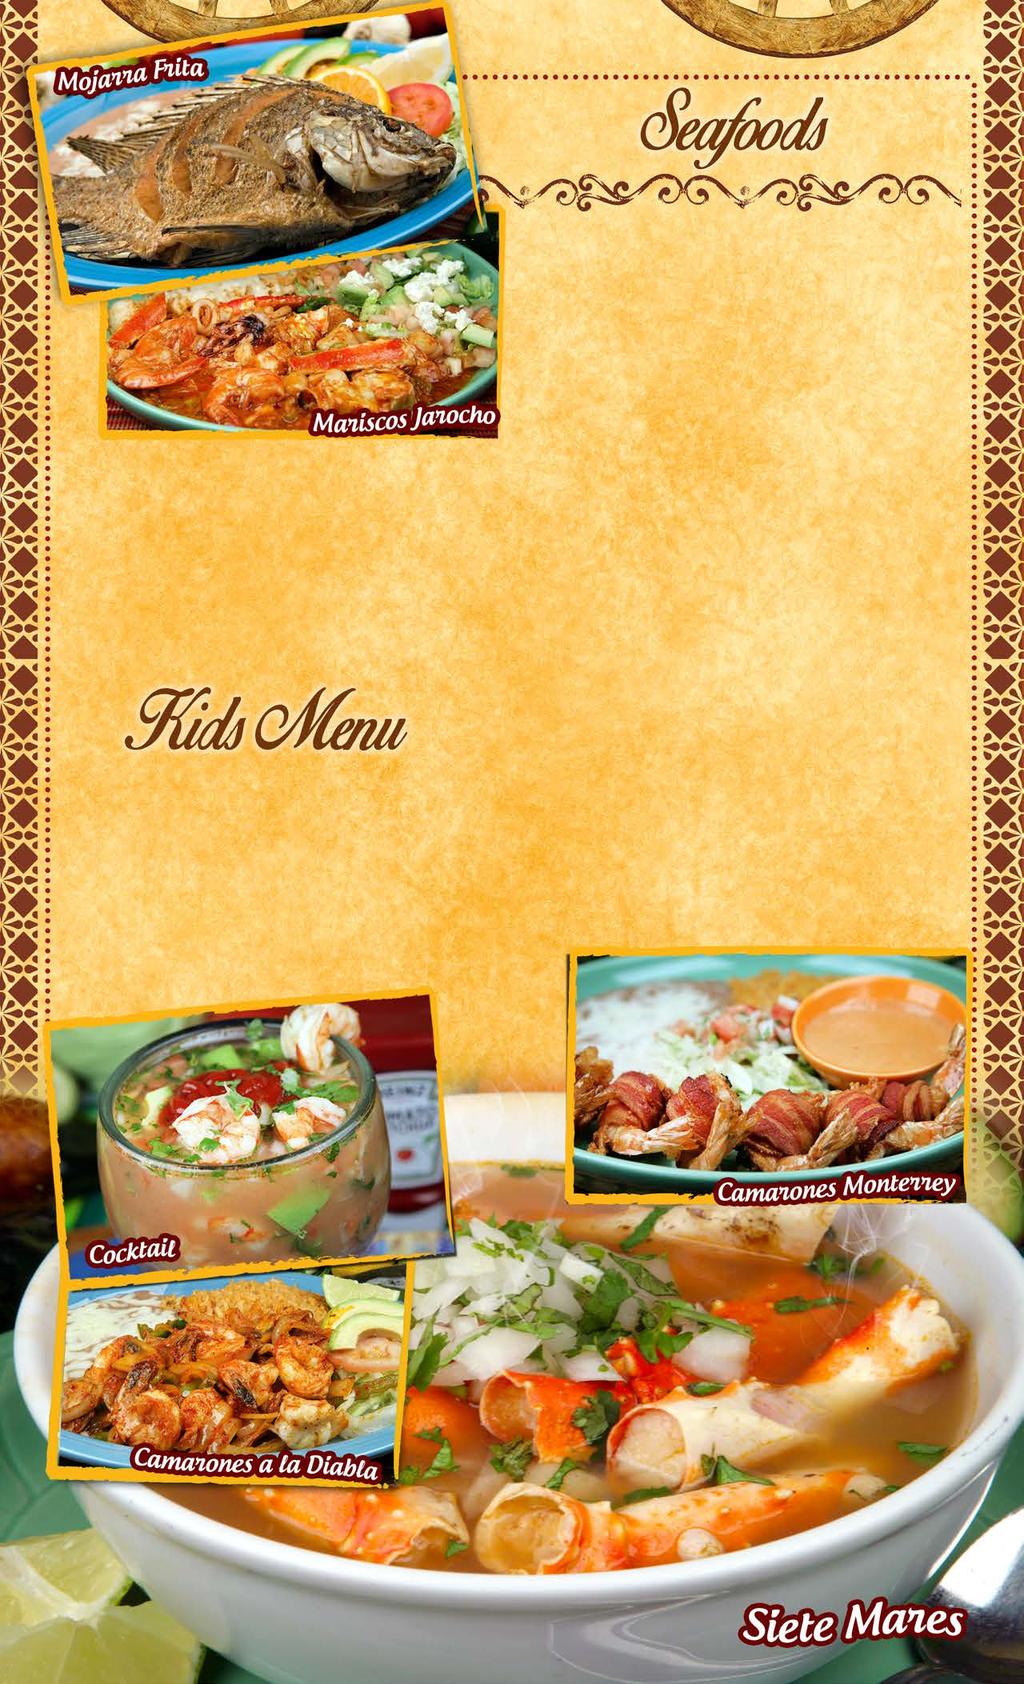 MARISCOS JAROCHOS $20.99 Sautéed shrimp, octopus, scallops, crab legs, fish, calamari in red spicy sauce, served on a bed of rice, with Jack cheese, lettuce and tomatoes MARISCADA $32.